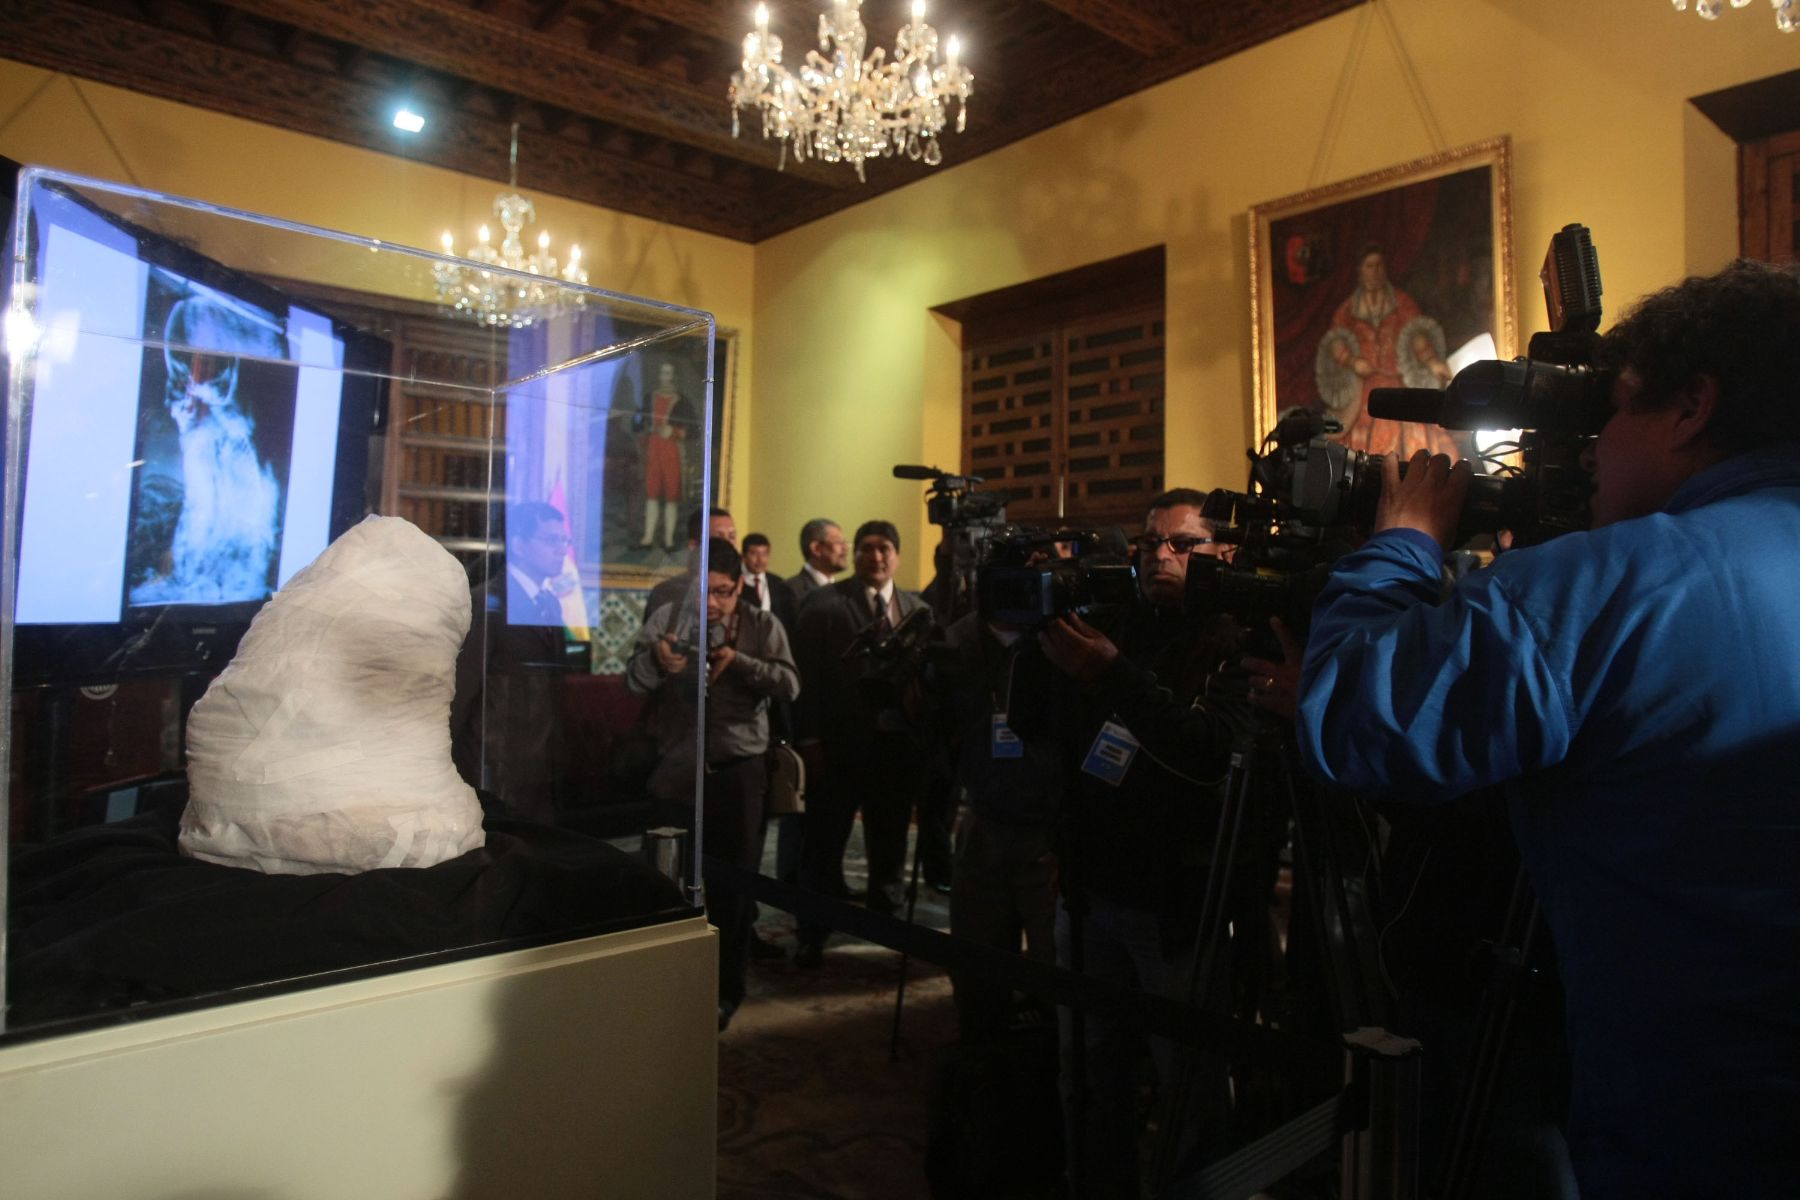 The mummy was wrapped in white linen because of its precarious condition. Photo: ANDINA/Juan Carlos Guzmán